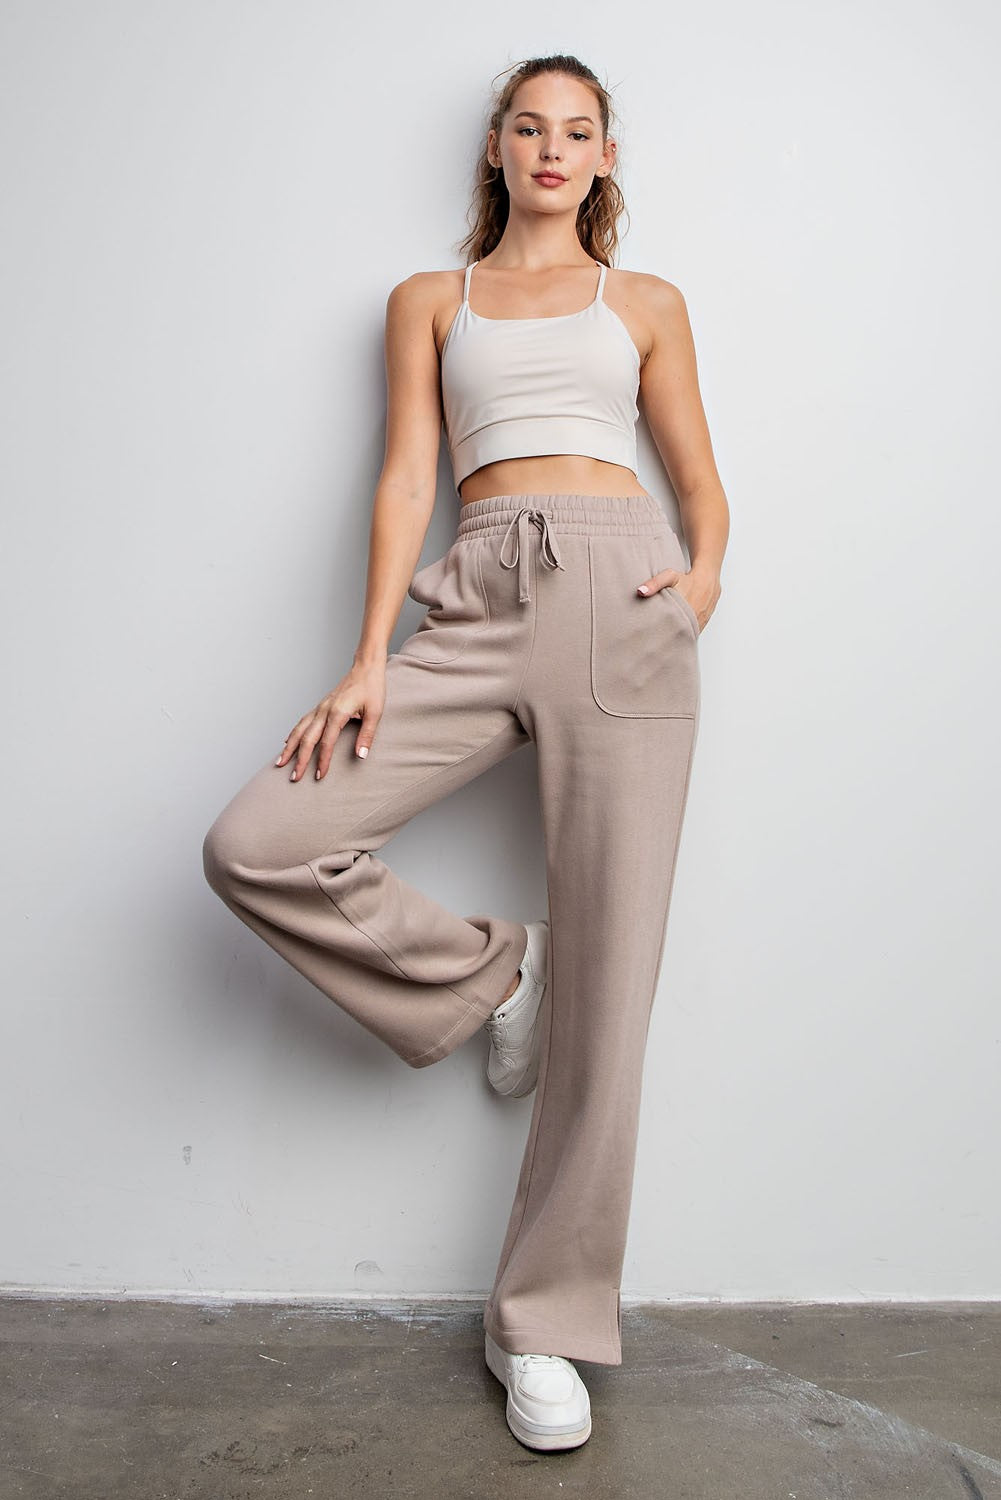 Rae Mode French Terry Straight Leg Lounge Pants - Heather Grey